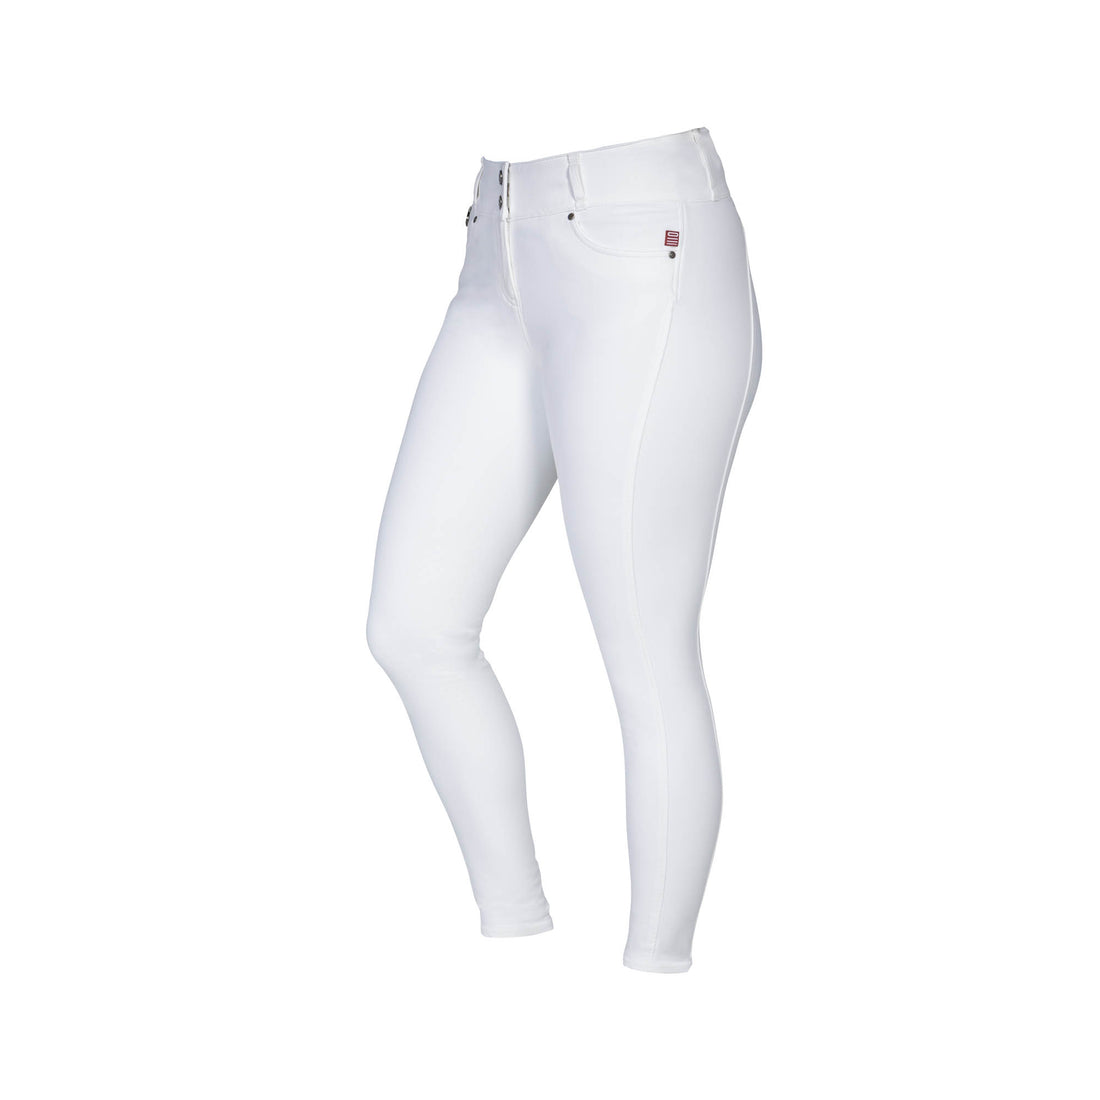 Julia Riding Breeches - Knee Patch